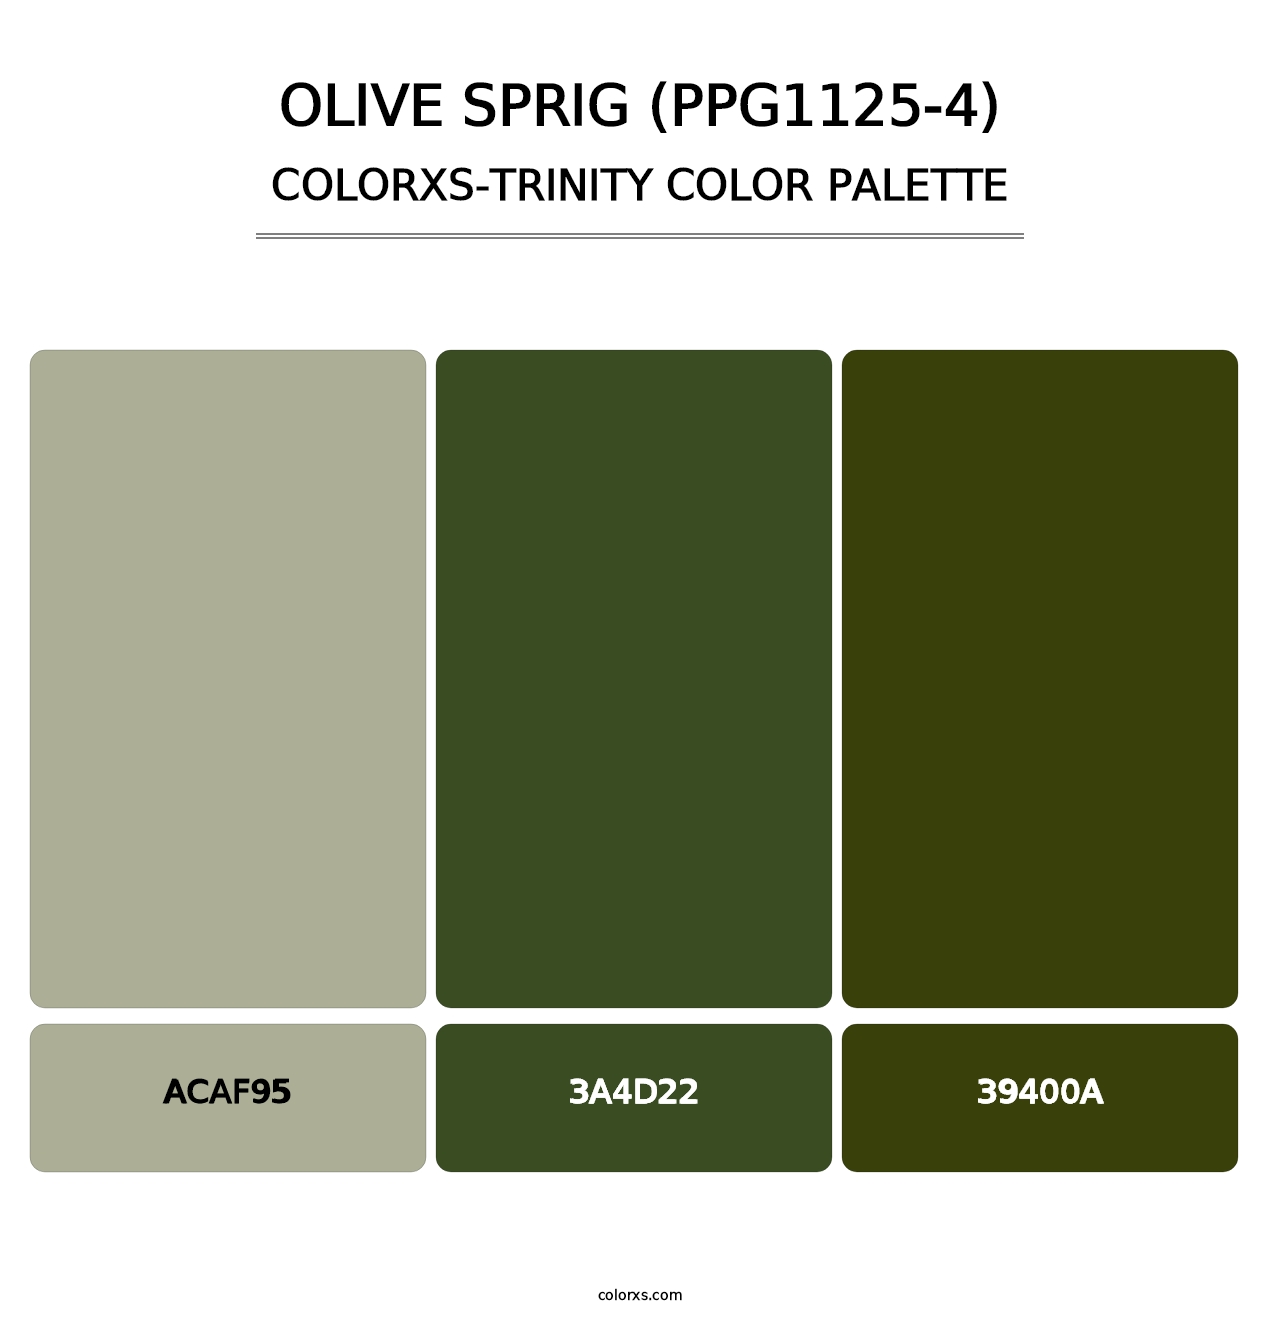 Olive Sprig (PPG1125-4) - Colorxs Trinity Palette